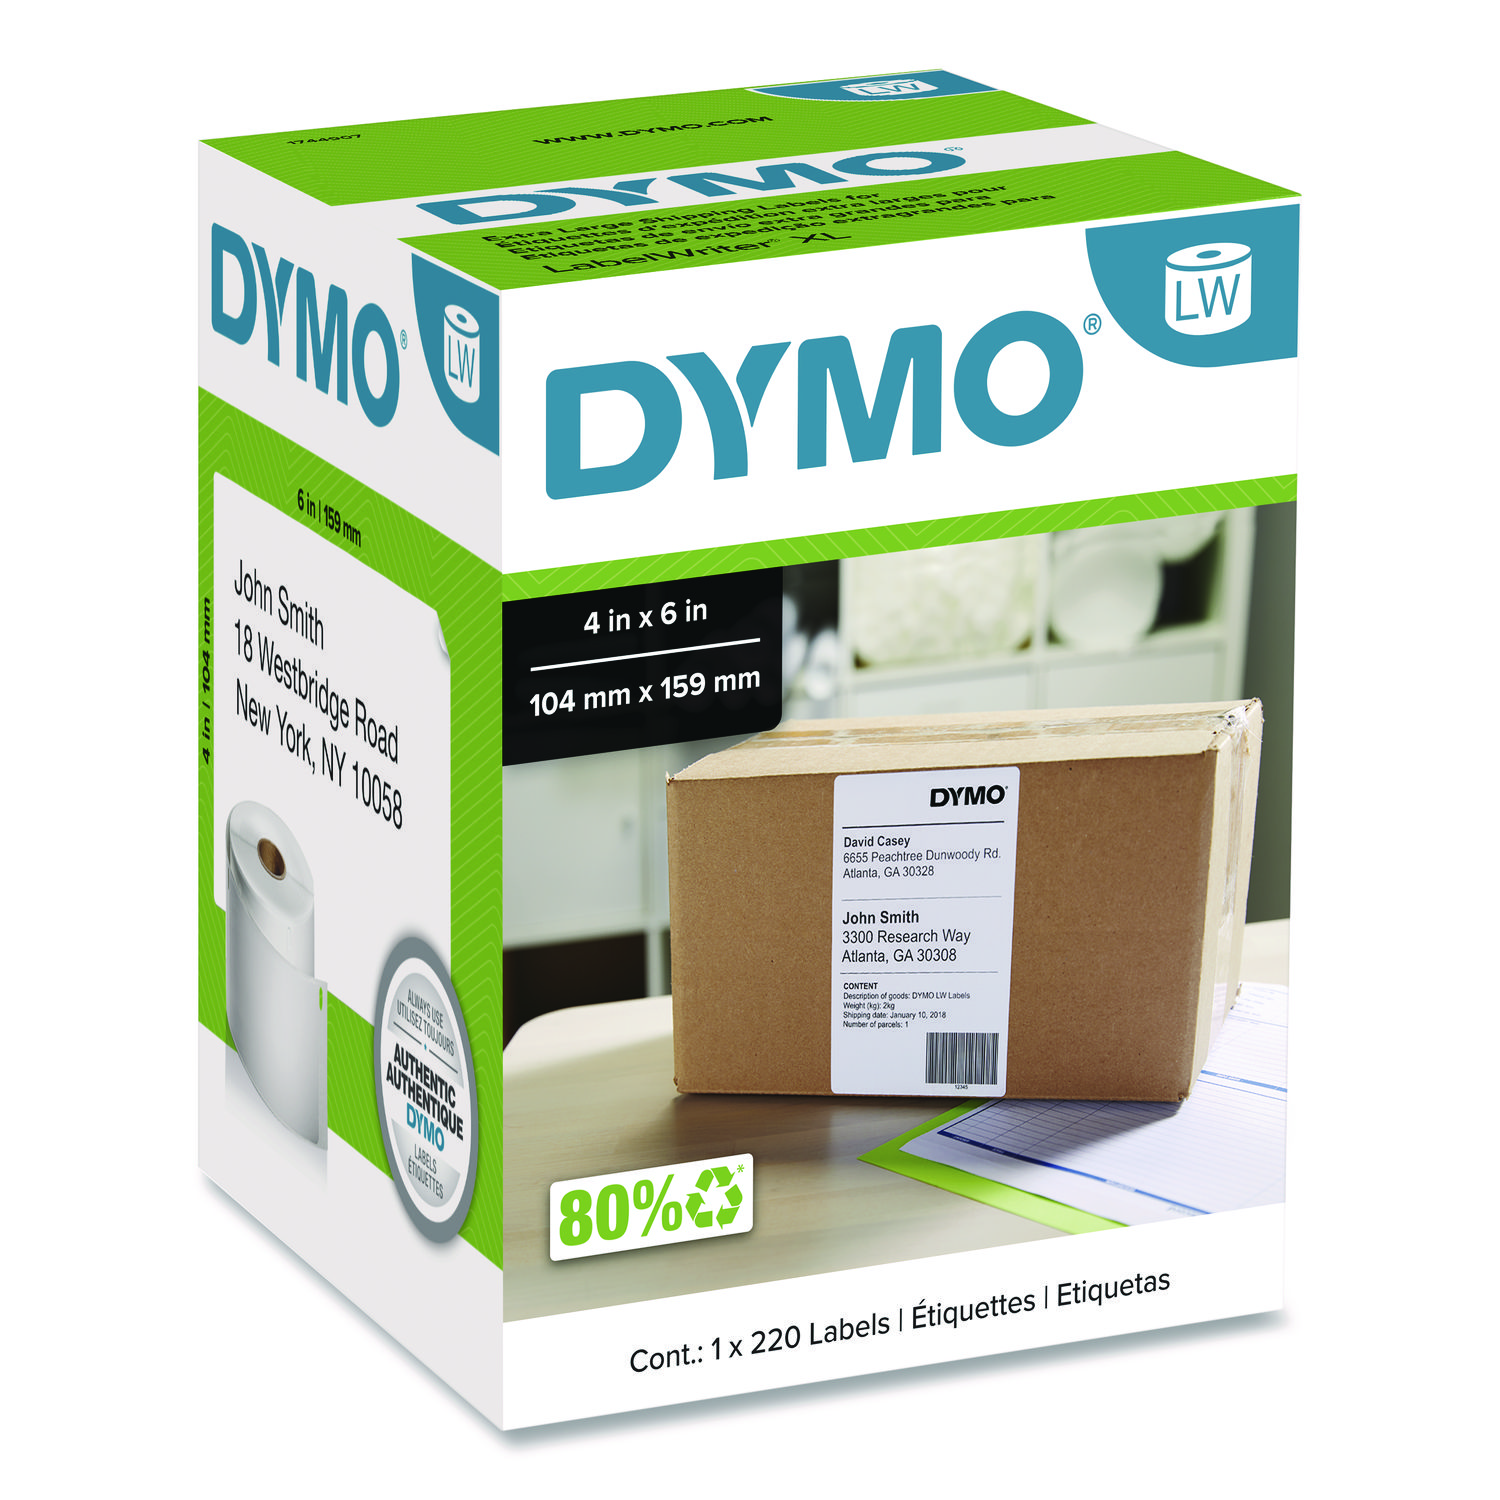 Dymo Appointment Business Cards, White